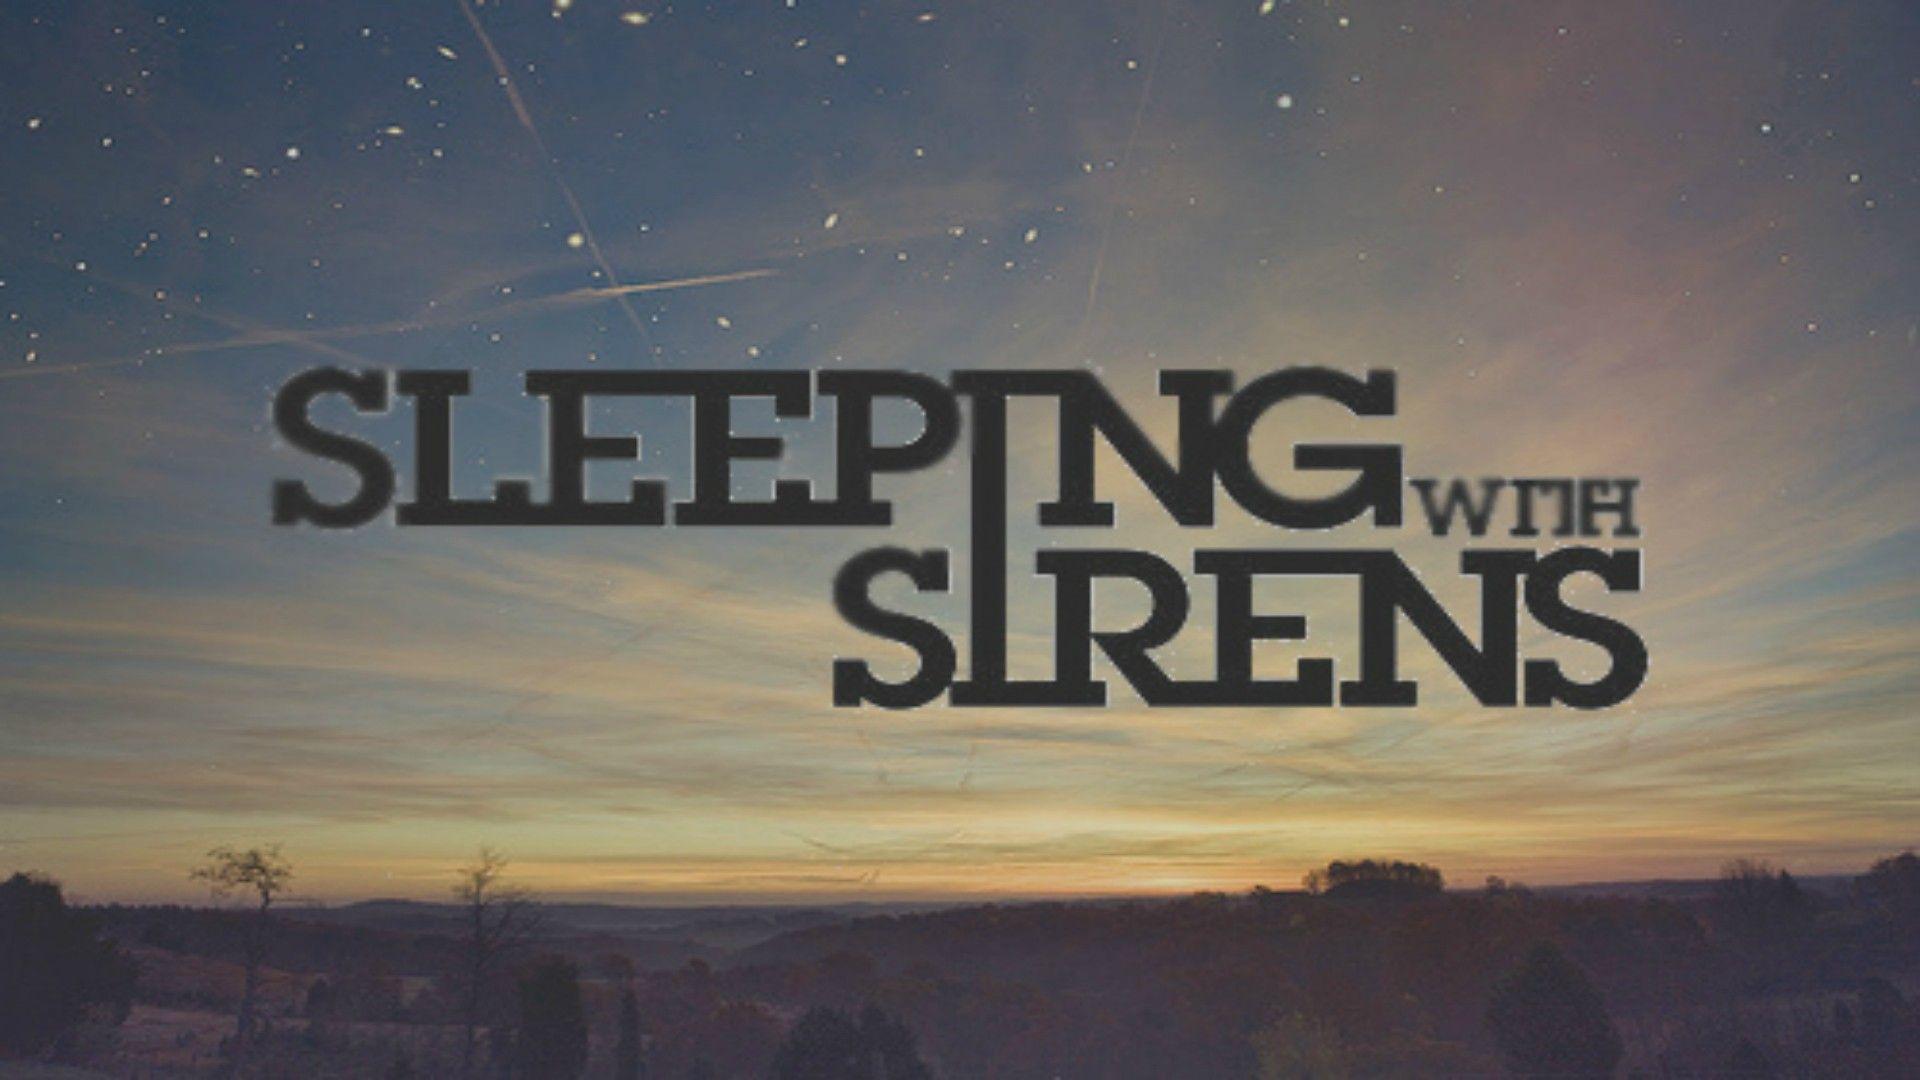 Sleeping With Sirens bands wallpaperx1080